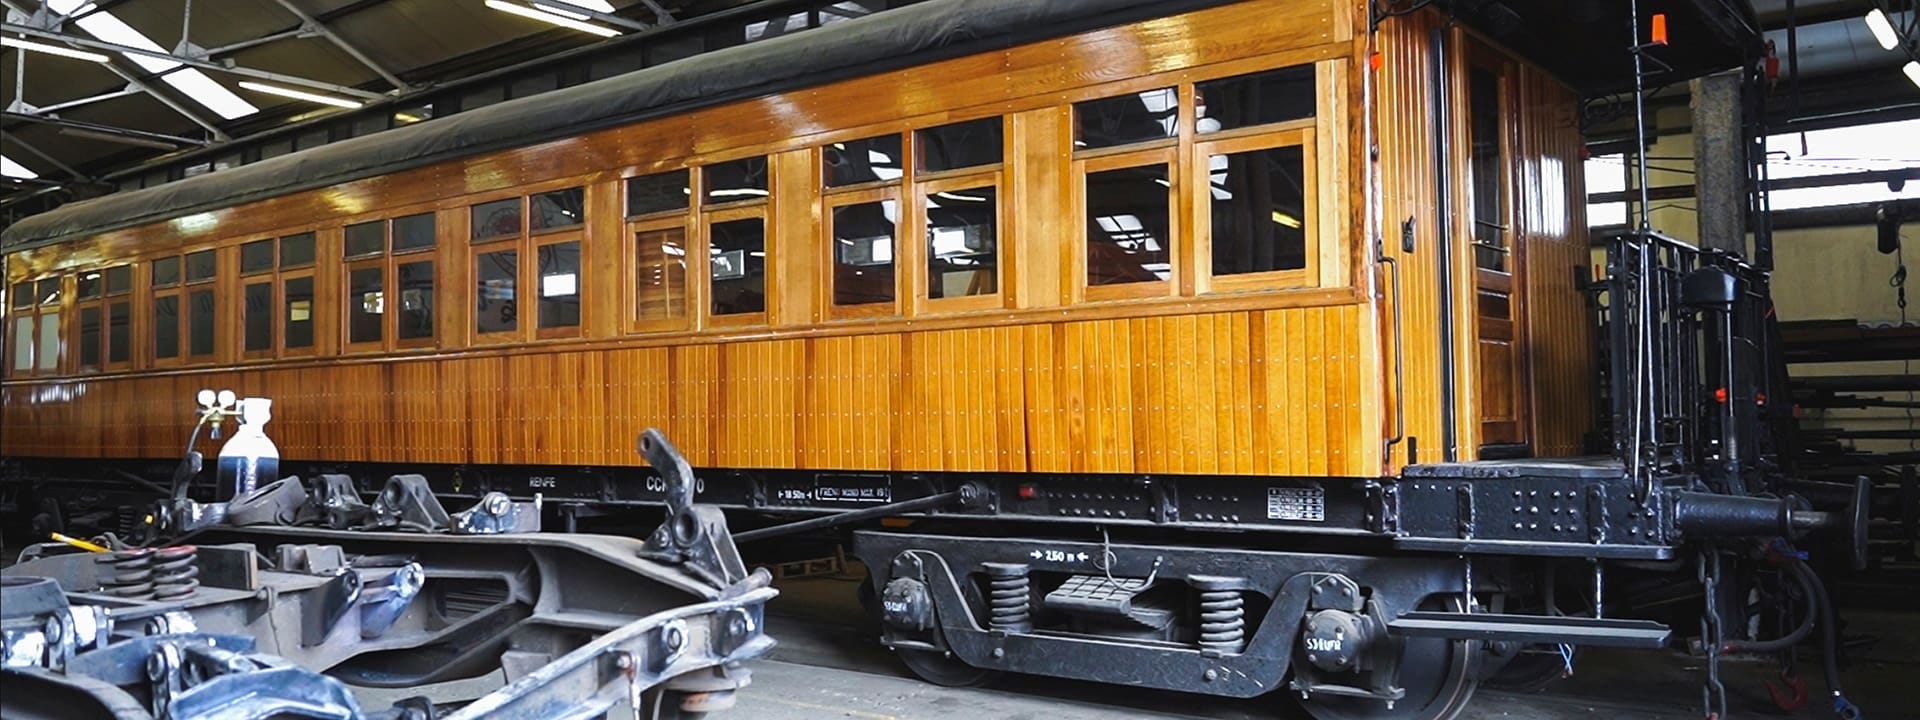 Restoration of Vintage Carriages for a Tourist Train in Spain 